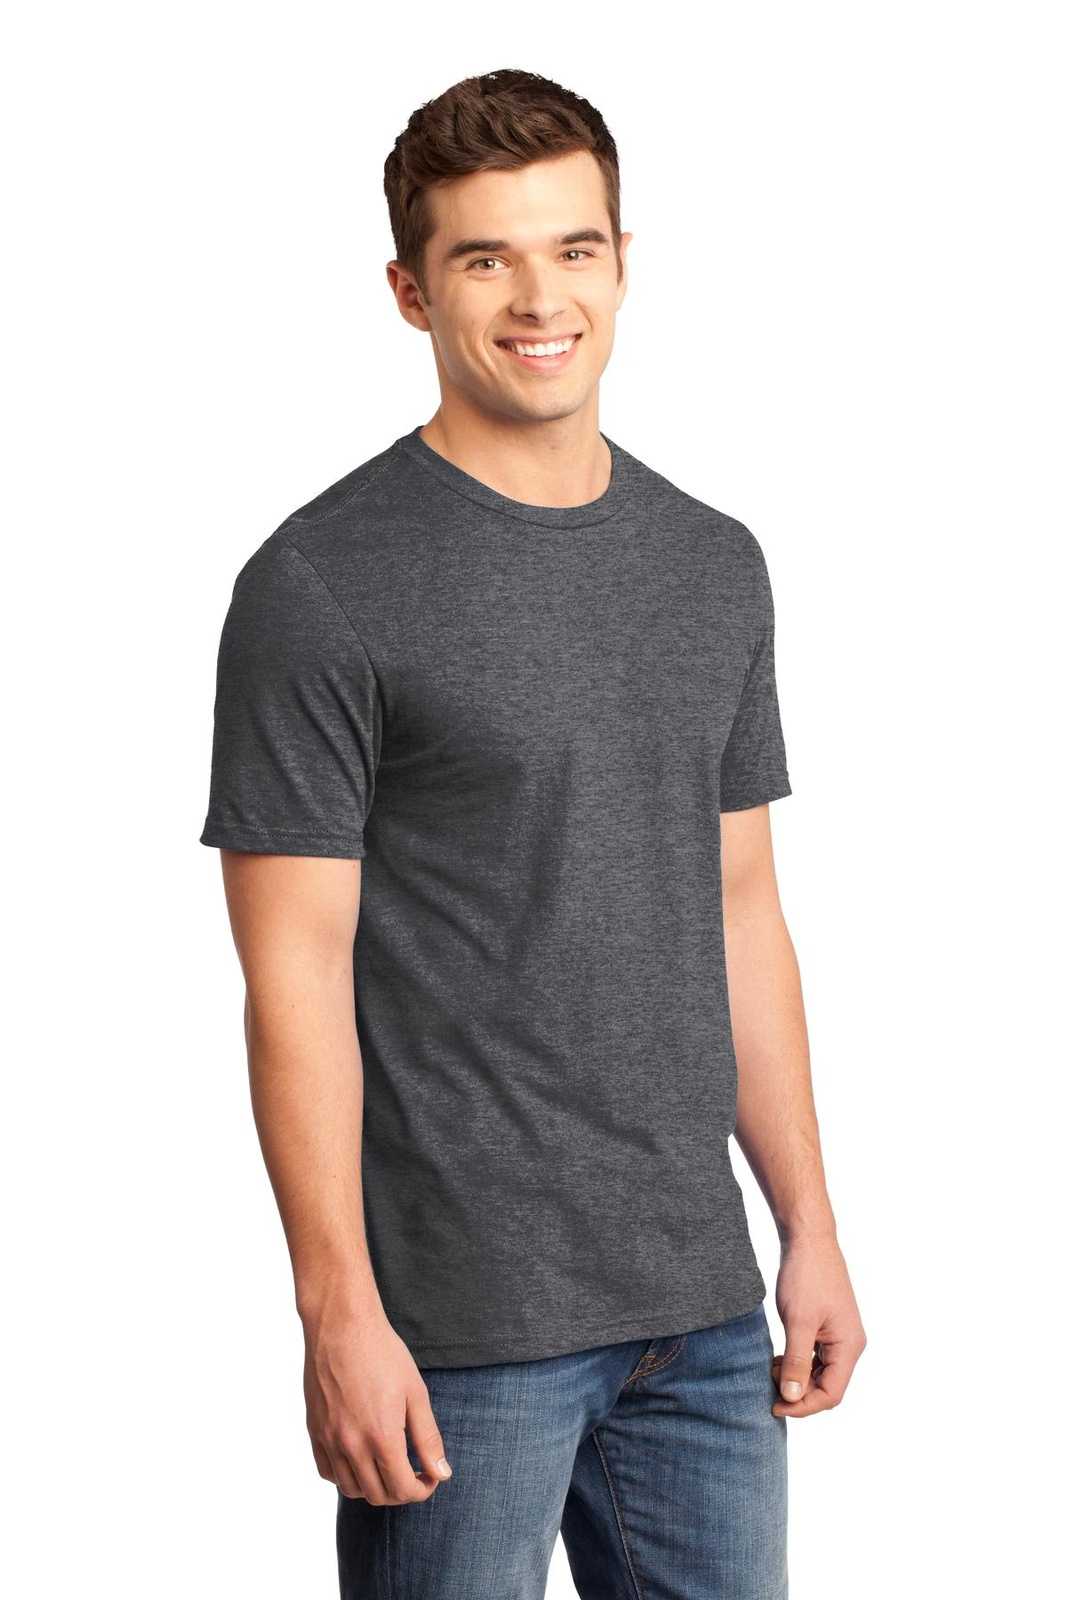 District DT6000 Very Important Tee - Heathered Charcoal - HIT a Double - 4